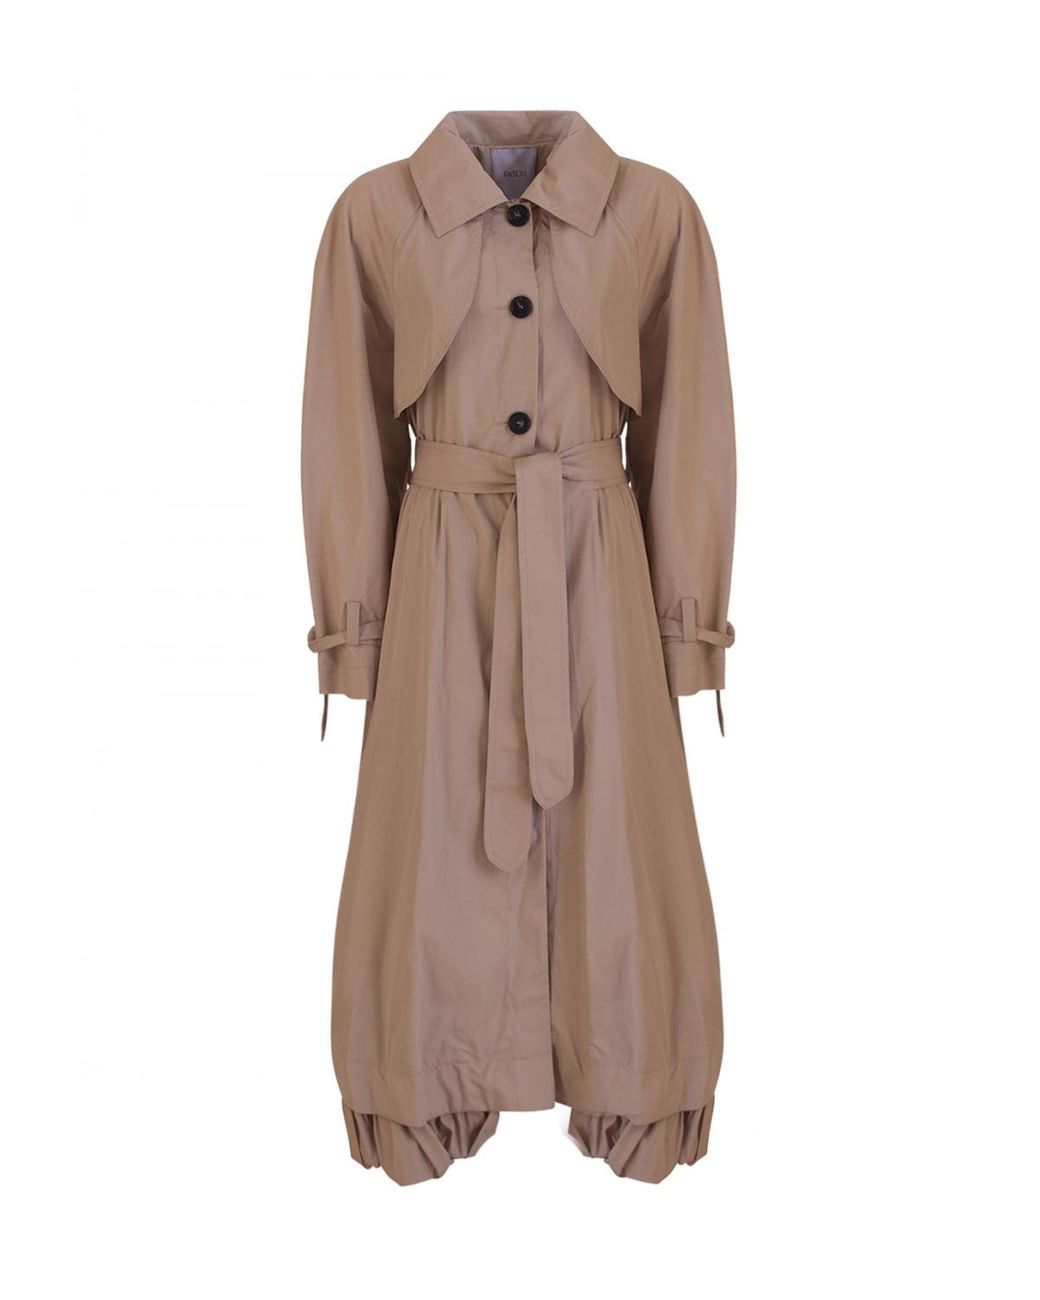 Patou Cotton Gabardine Trench Coat in Beige (Natural) - Lyst